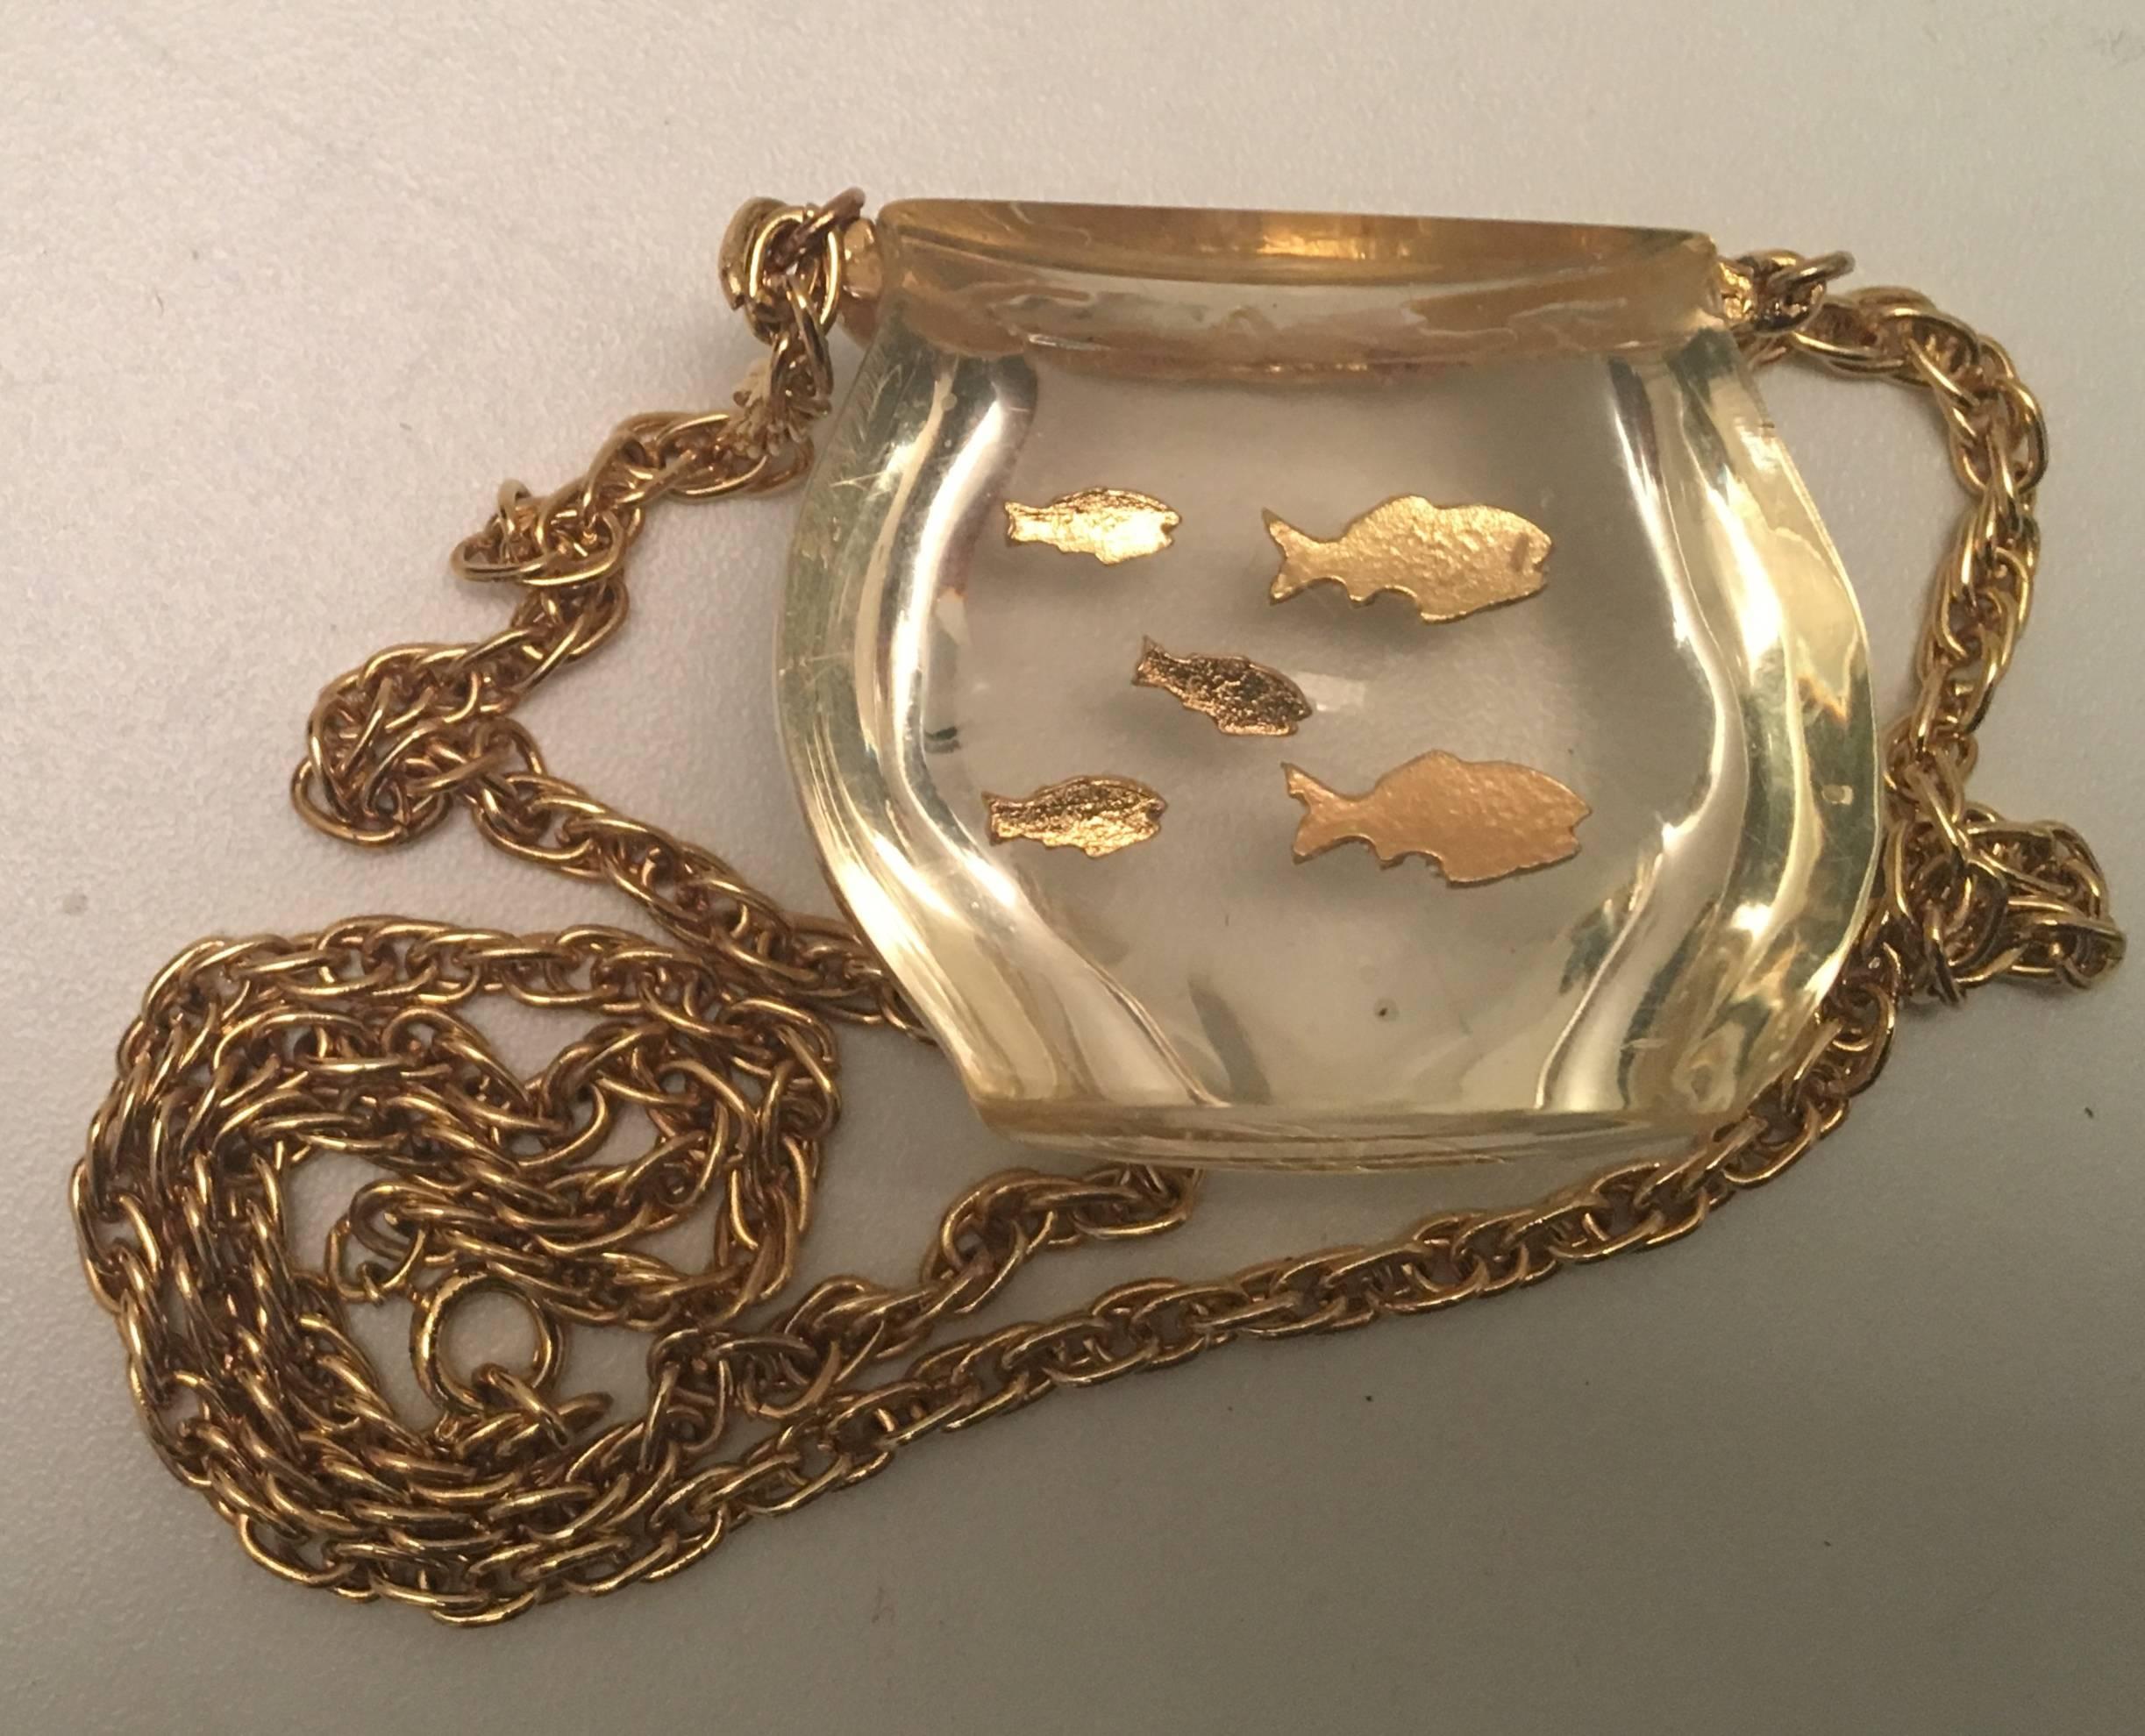 Presented here is a vintage lucite fish bowl necklace from the 1970's. The necklace is comprised of a beautiful lucite fishbowl containing five swimming fish. There is a gold tone metal chain attached to the fish bowl necklace. This wonderful